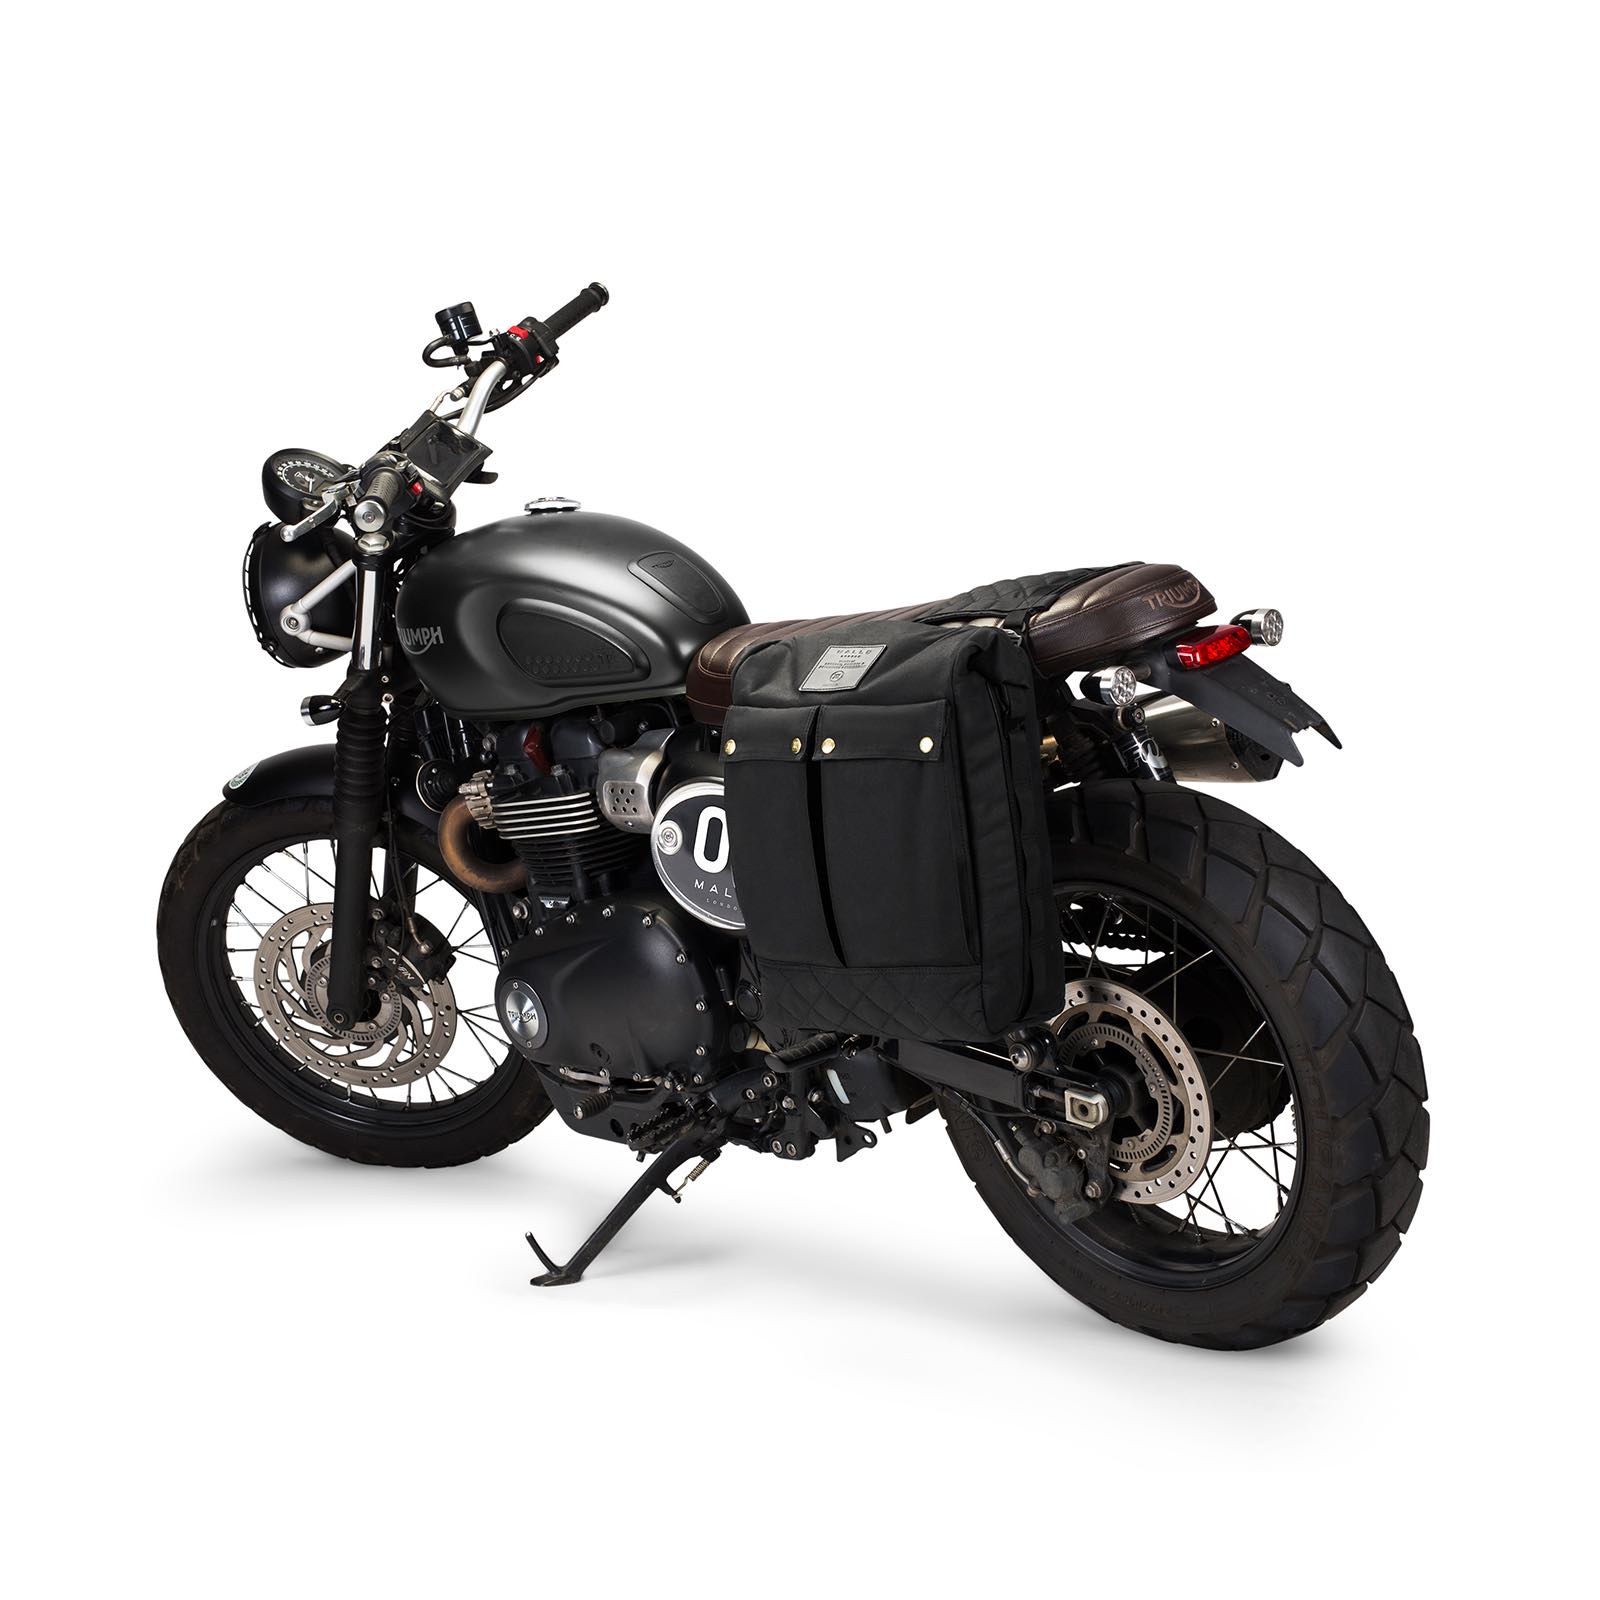 panniers for motorcycle